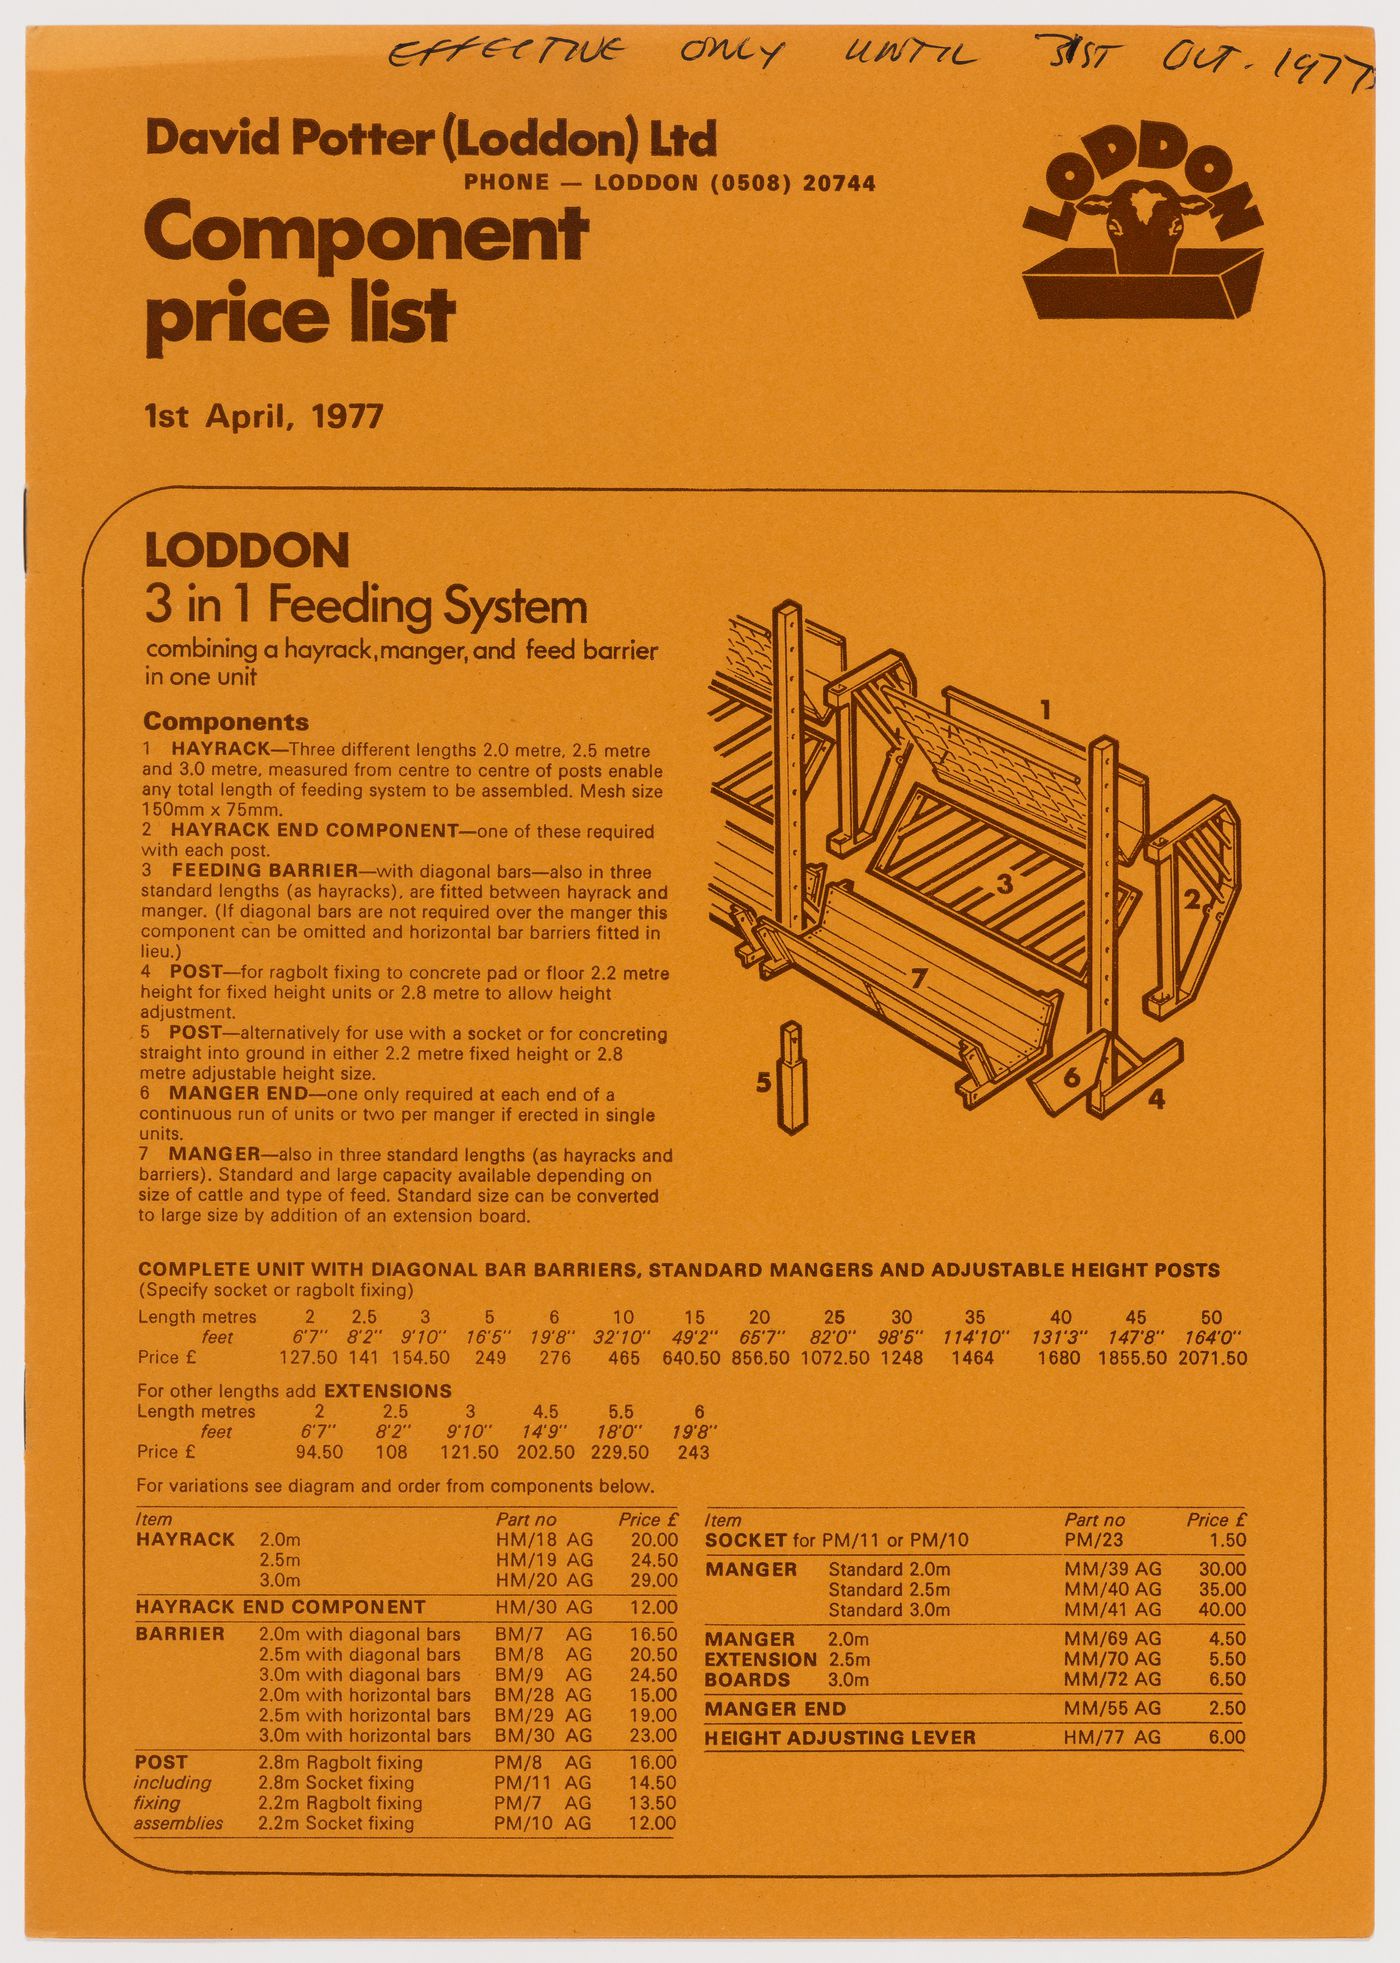 Component price list issued by David Potter (Loddon) Ltd., from the project file "Westpen"